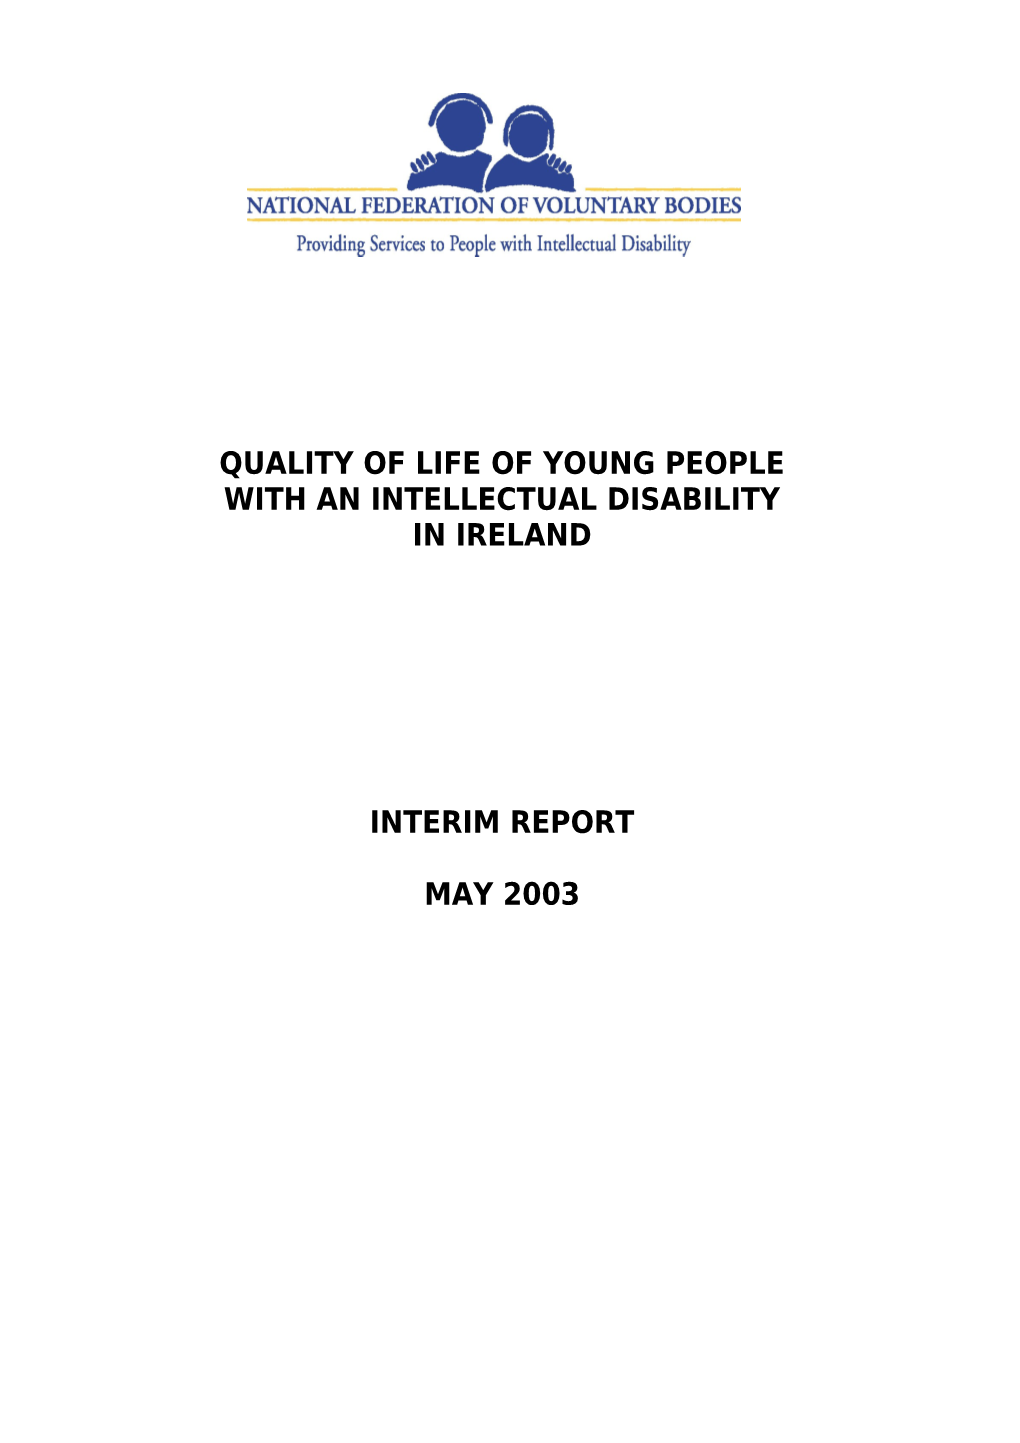 Quality of Life of Young People with an Intellectual Disability in Ireland